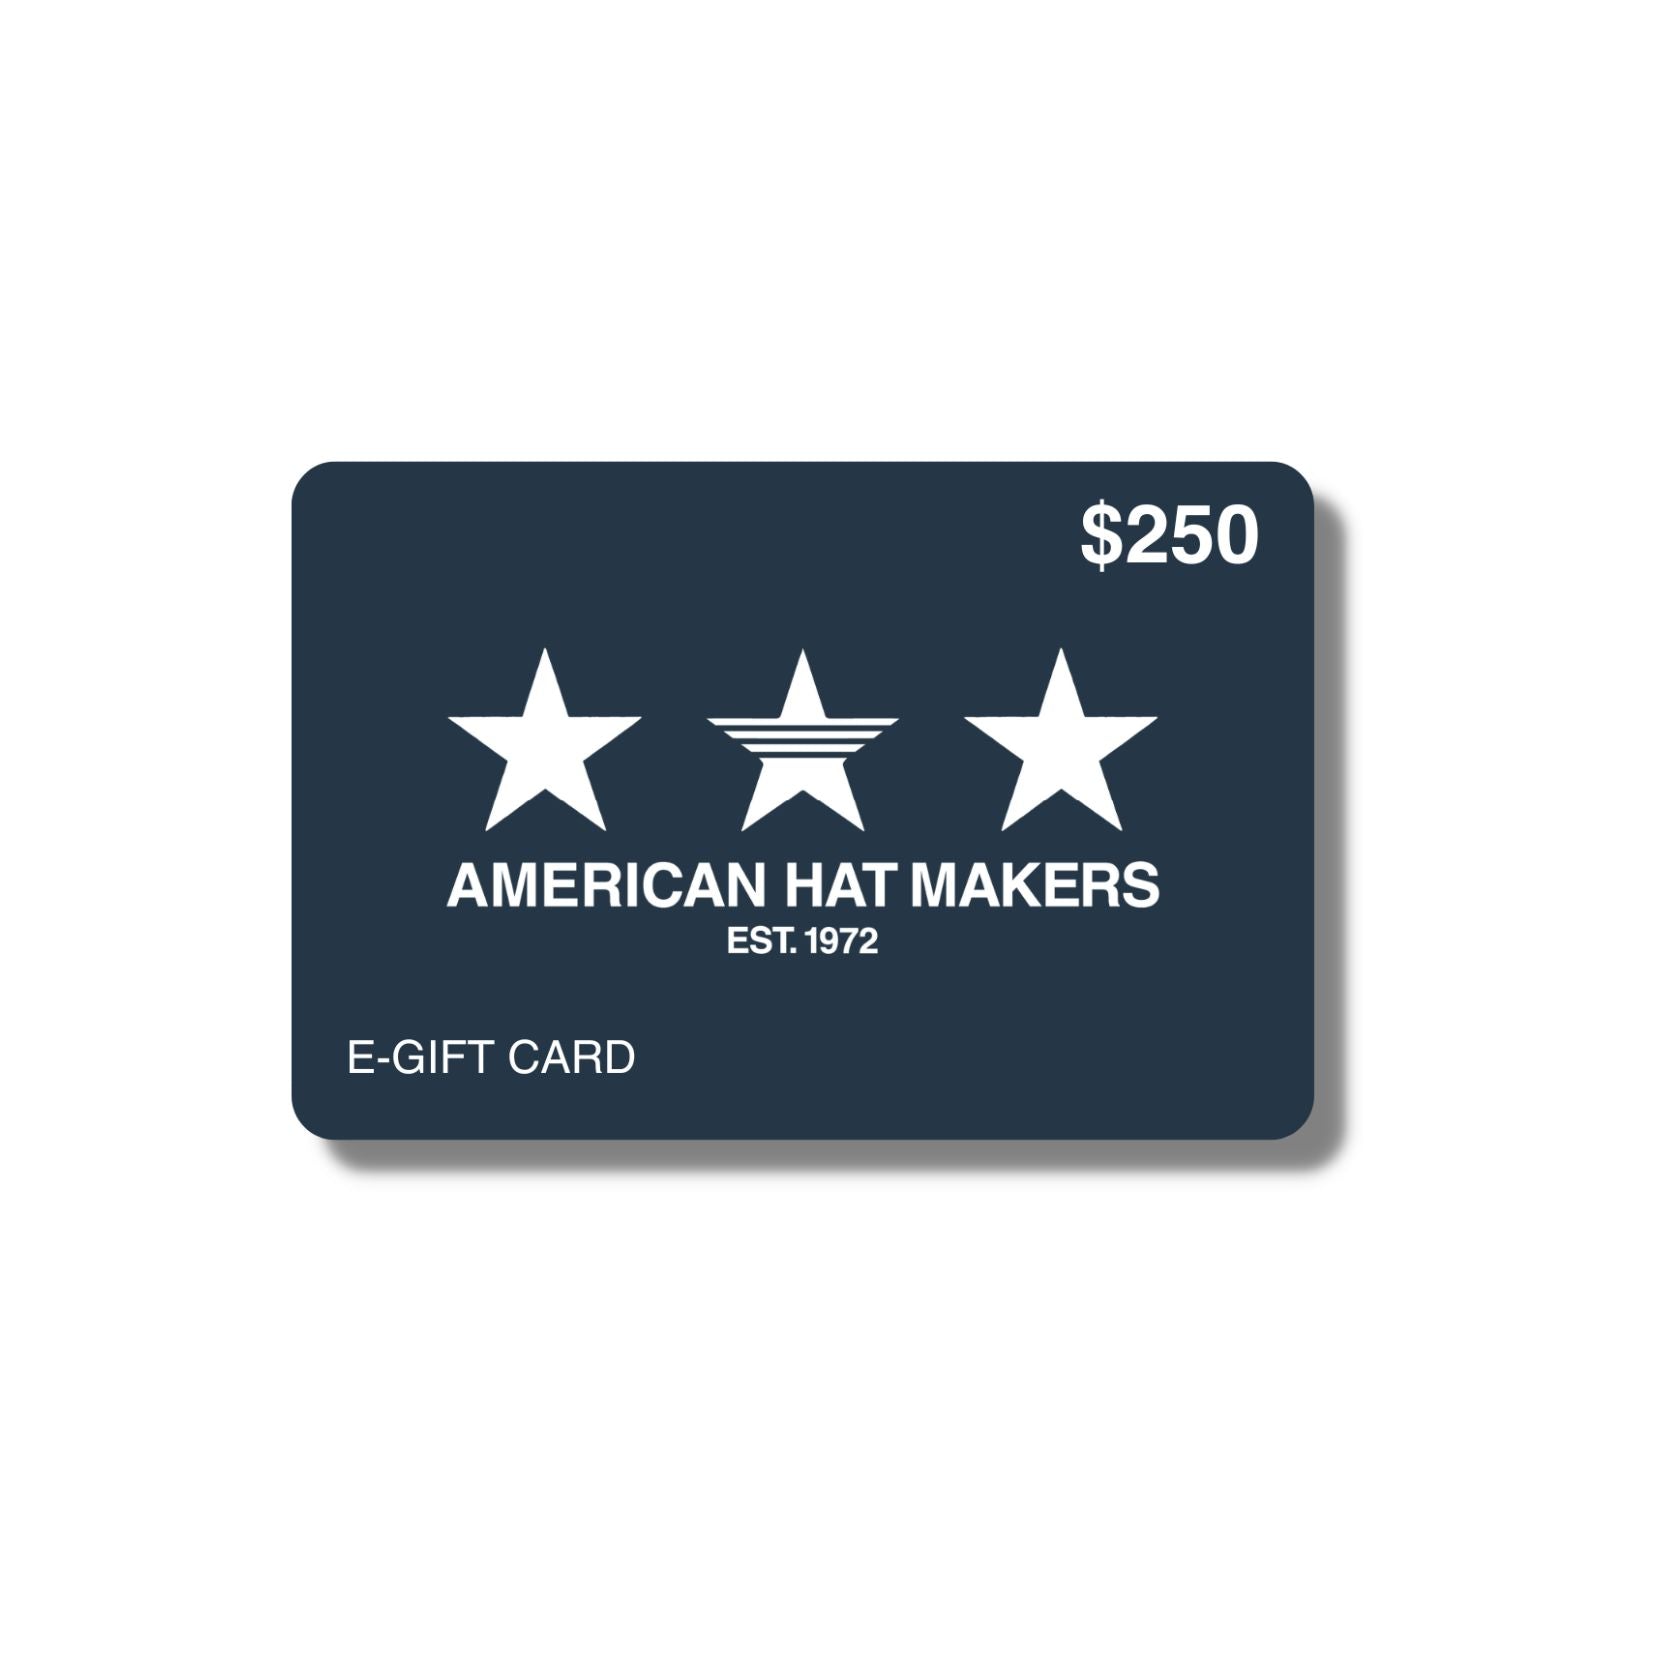 Electronic Gift Card amounting to $250 by American Hat Makers